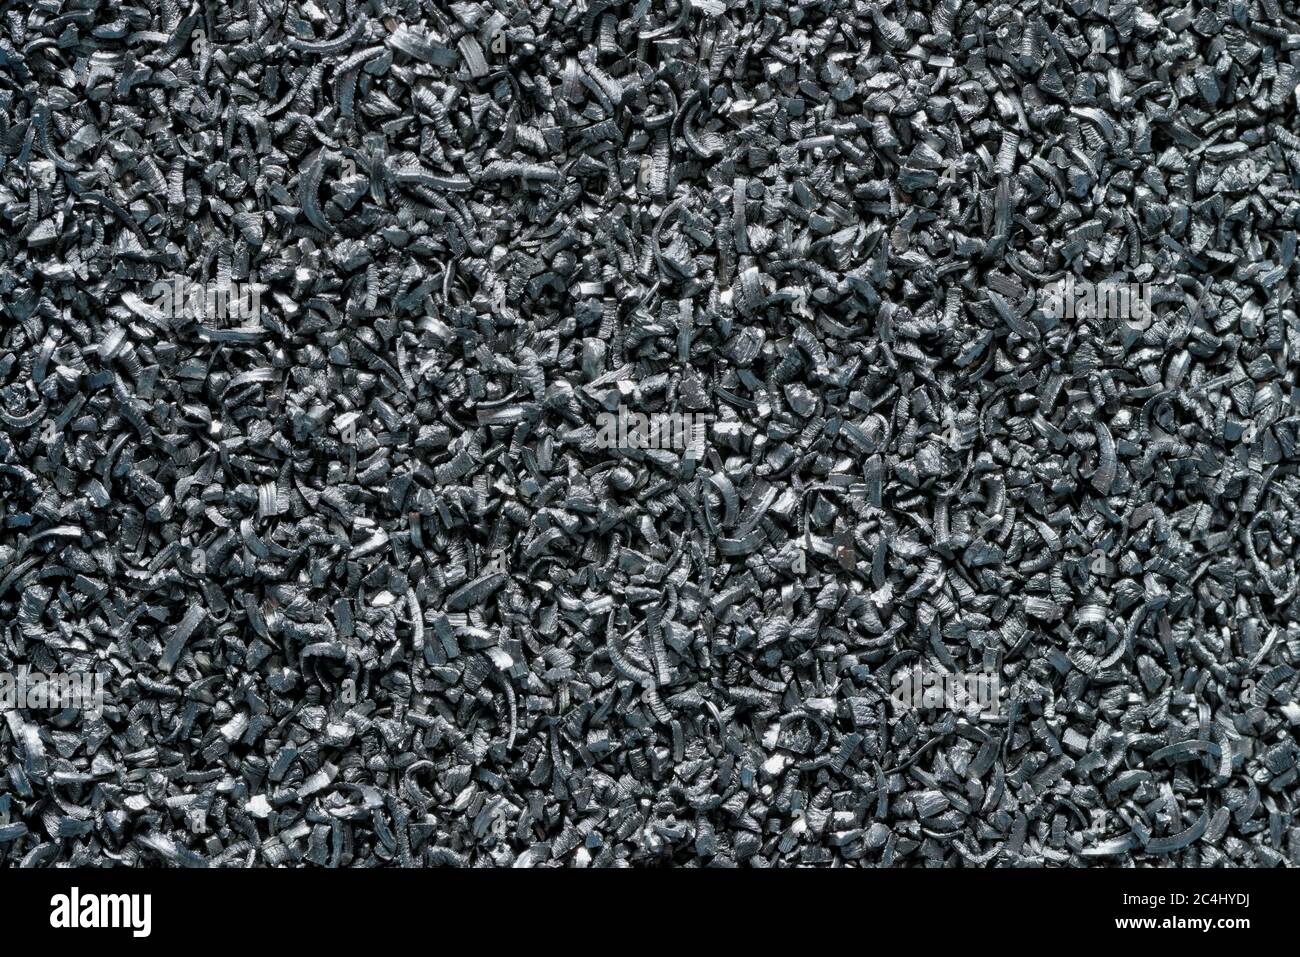 Pile of metal sawdust, industrial waste, close-up shot, abstract background Stock Photo